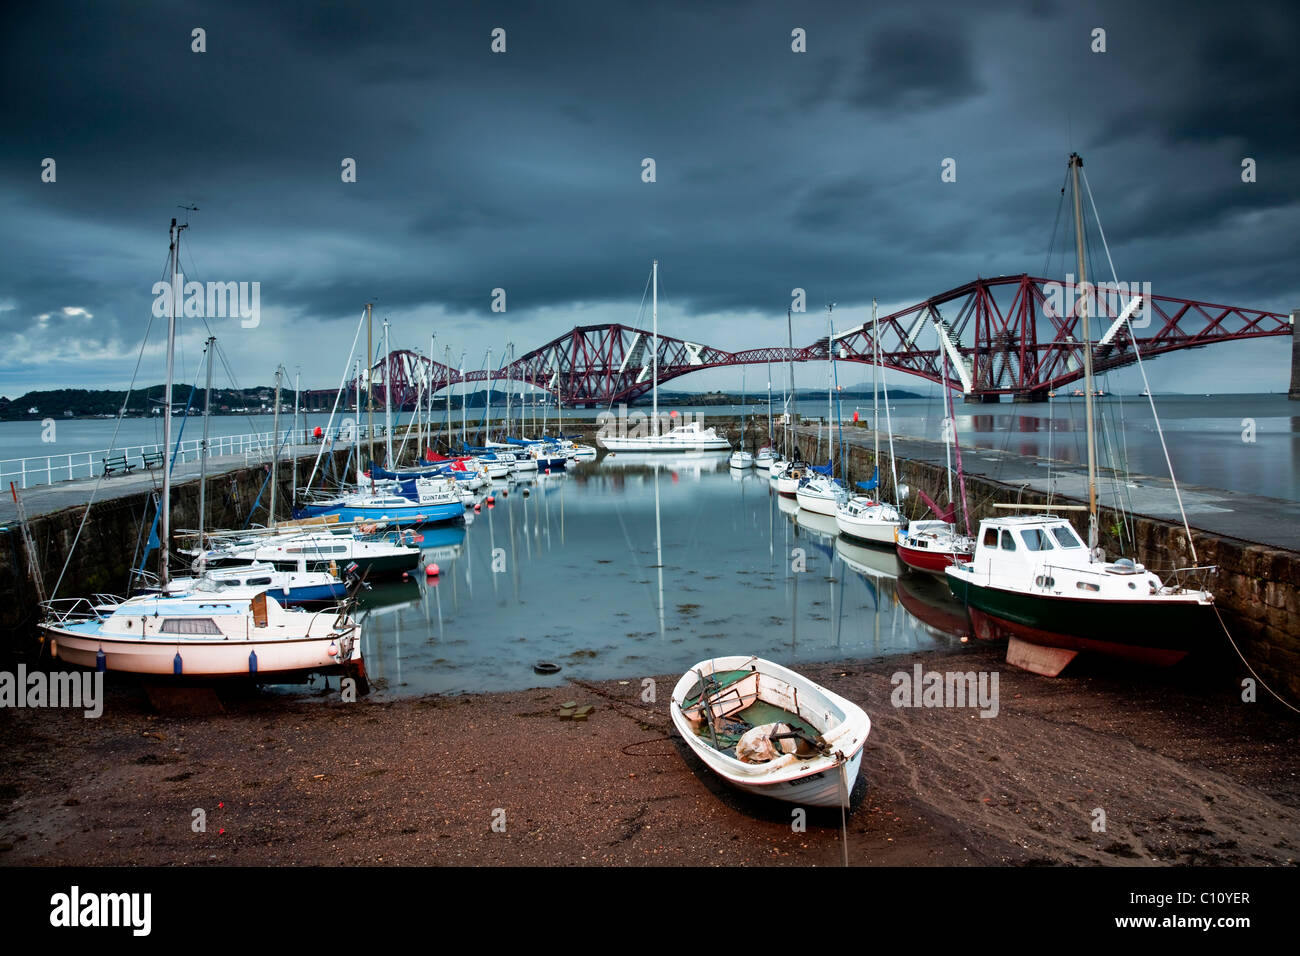 The Port of Queensferry with the Forth Railway Bridge, Scotland, United Kingdom, Europe Stock Photo